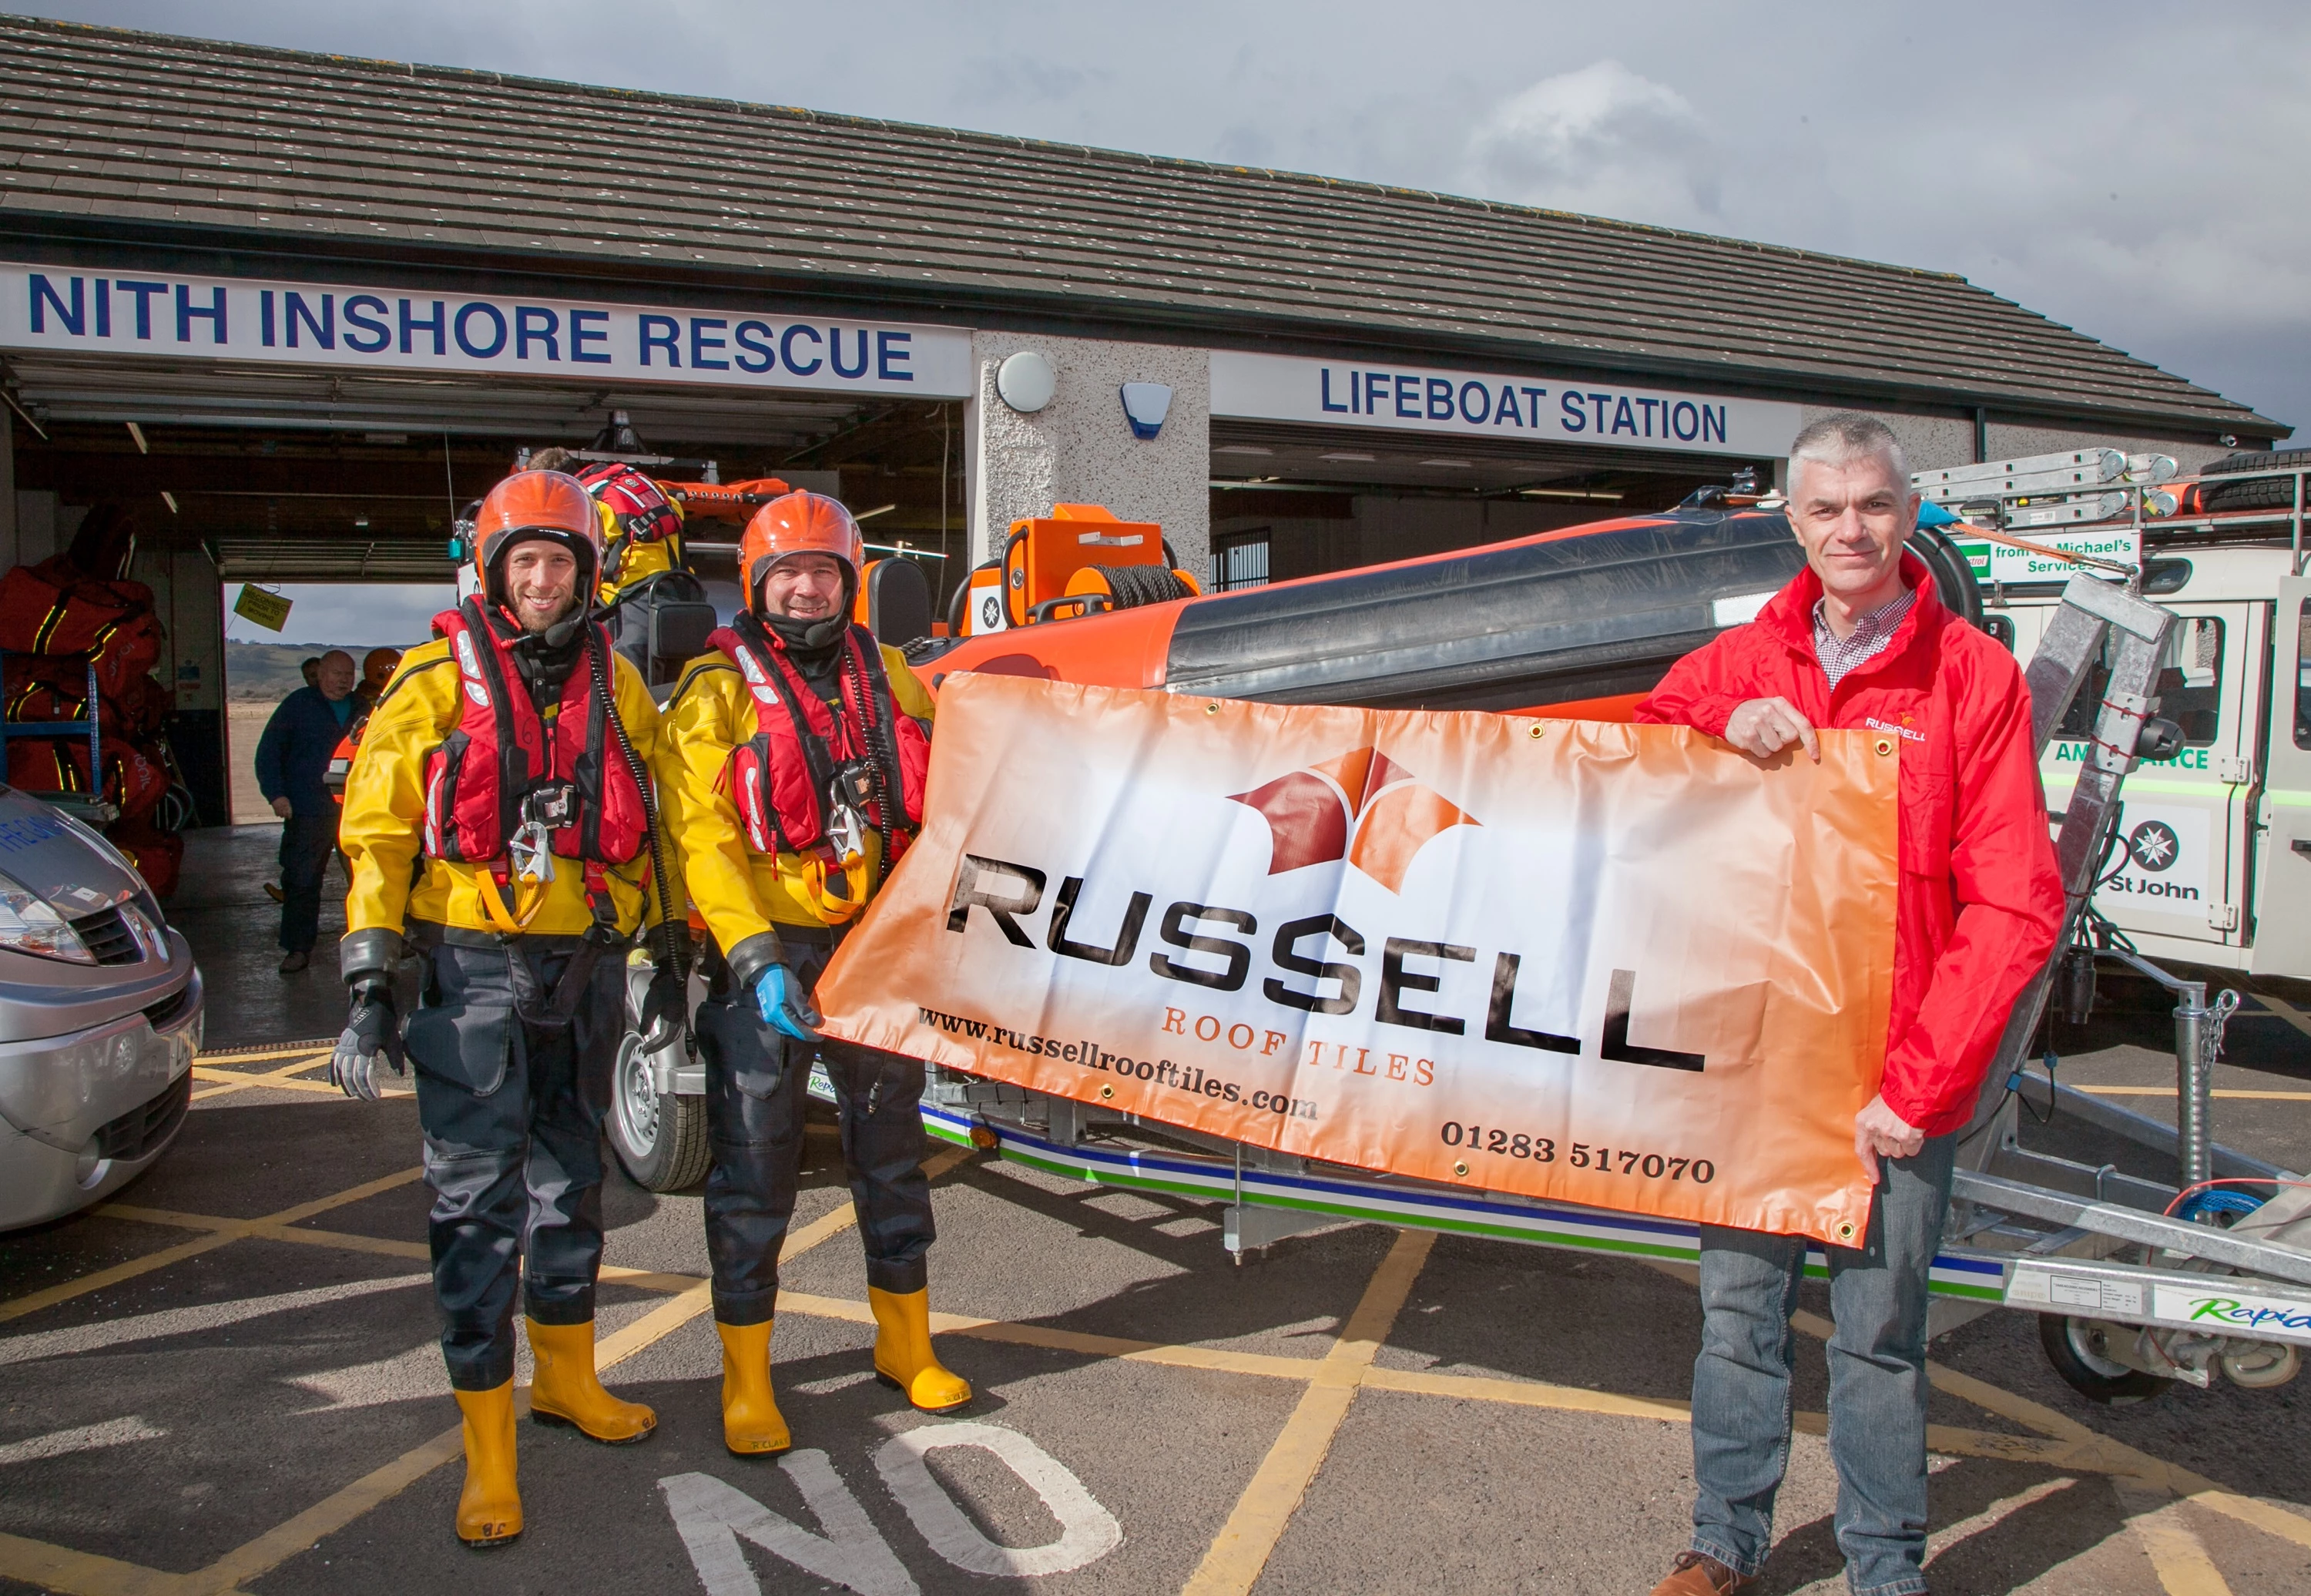 Russell Roof Tiles support Nith Inshore Rescue 